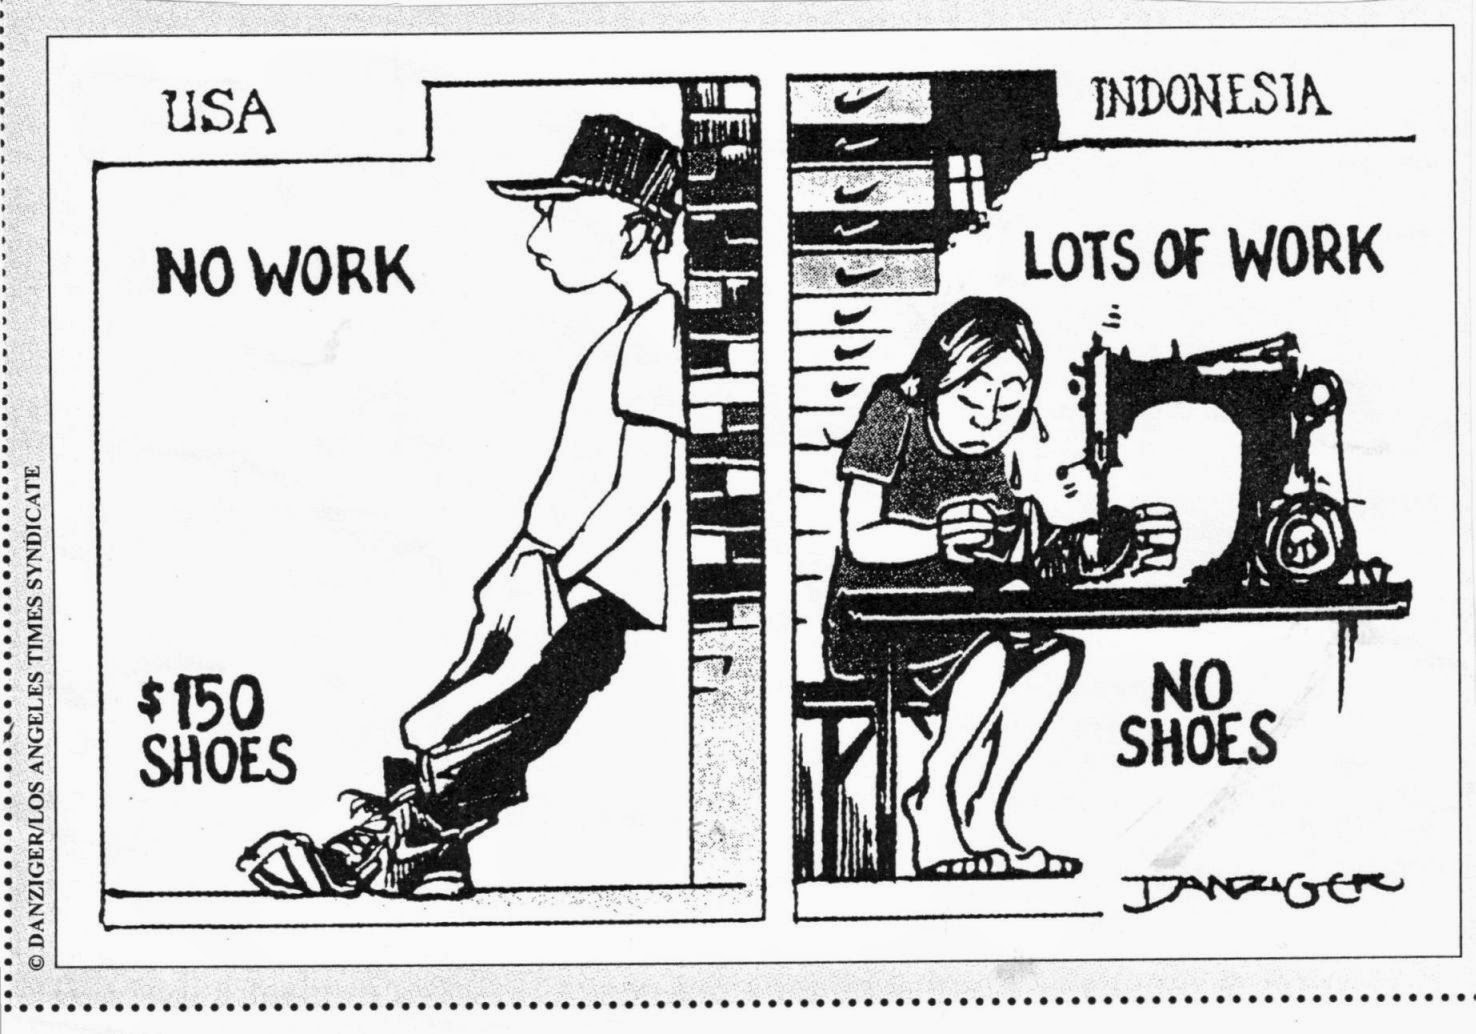 Danziger, J. (1996). The world according to Nike. Los Angeles Times.